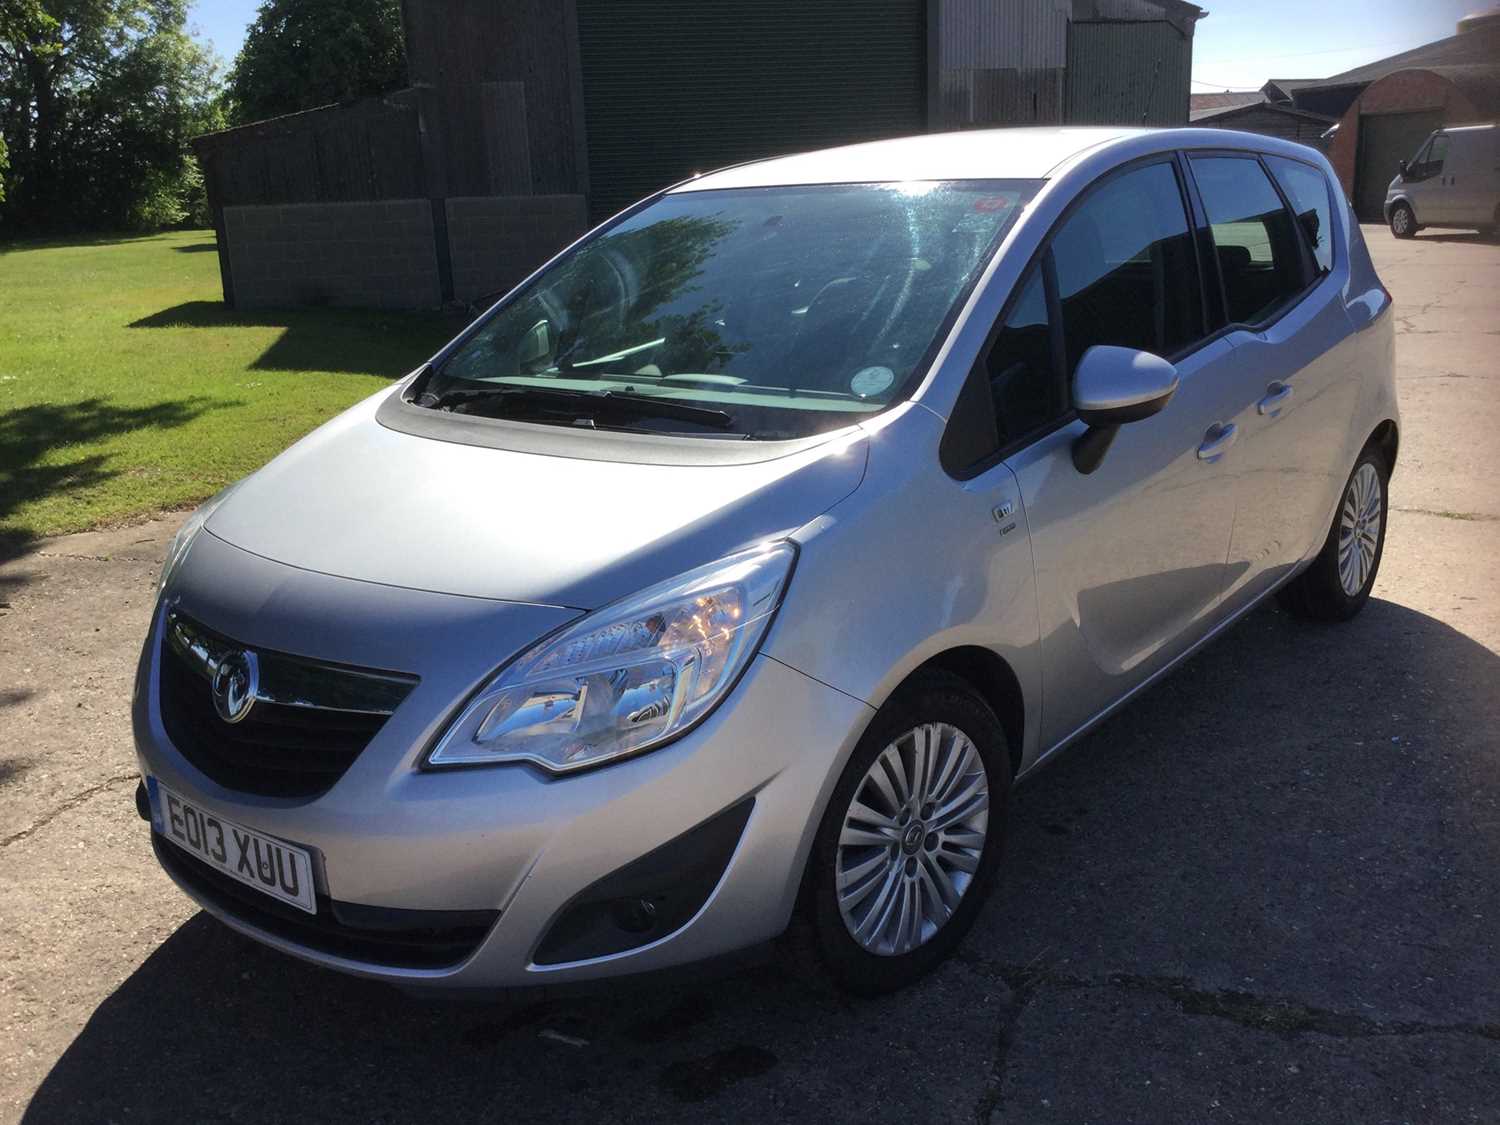 2013 Vauxhall Meriva 1.4i 16v Energy 5dr, manual, Reg. No. EO13 XUU, finished in silver. - Image 3 of 16